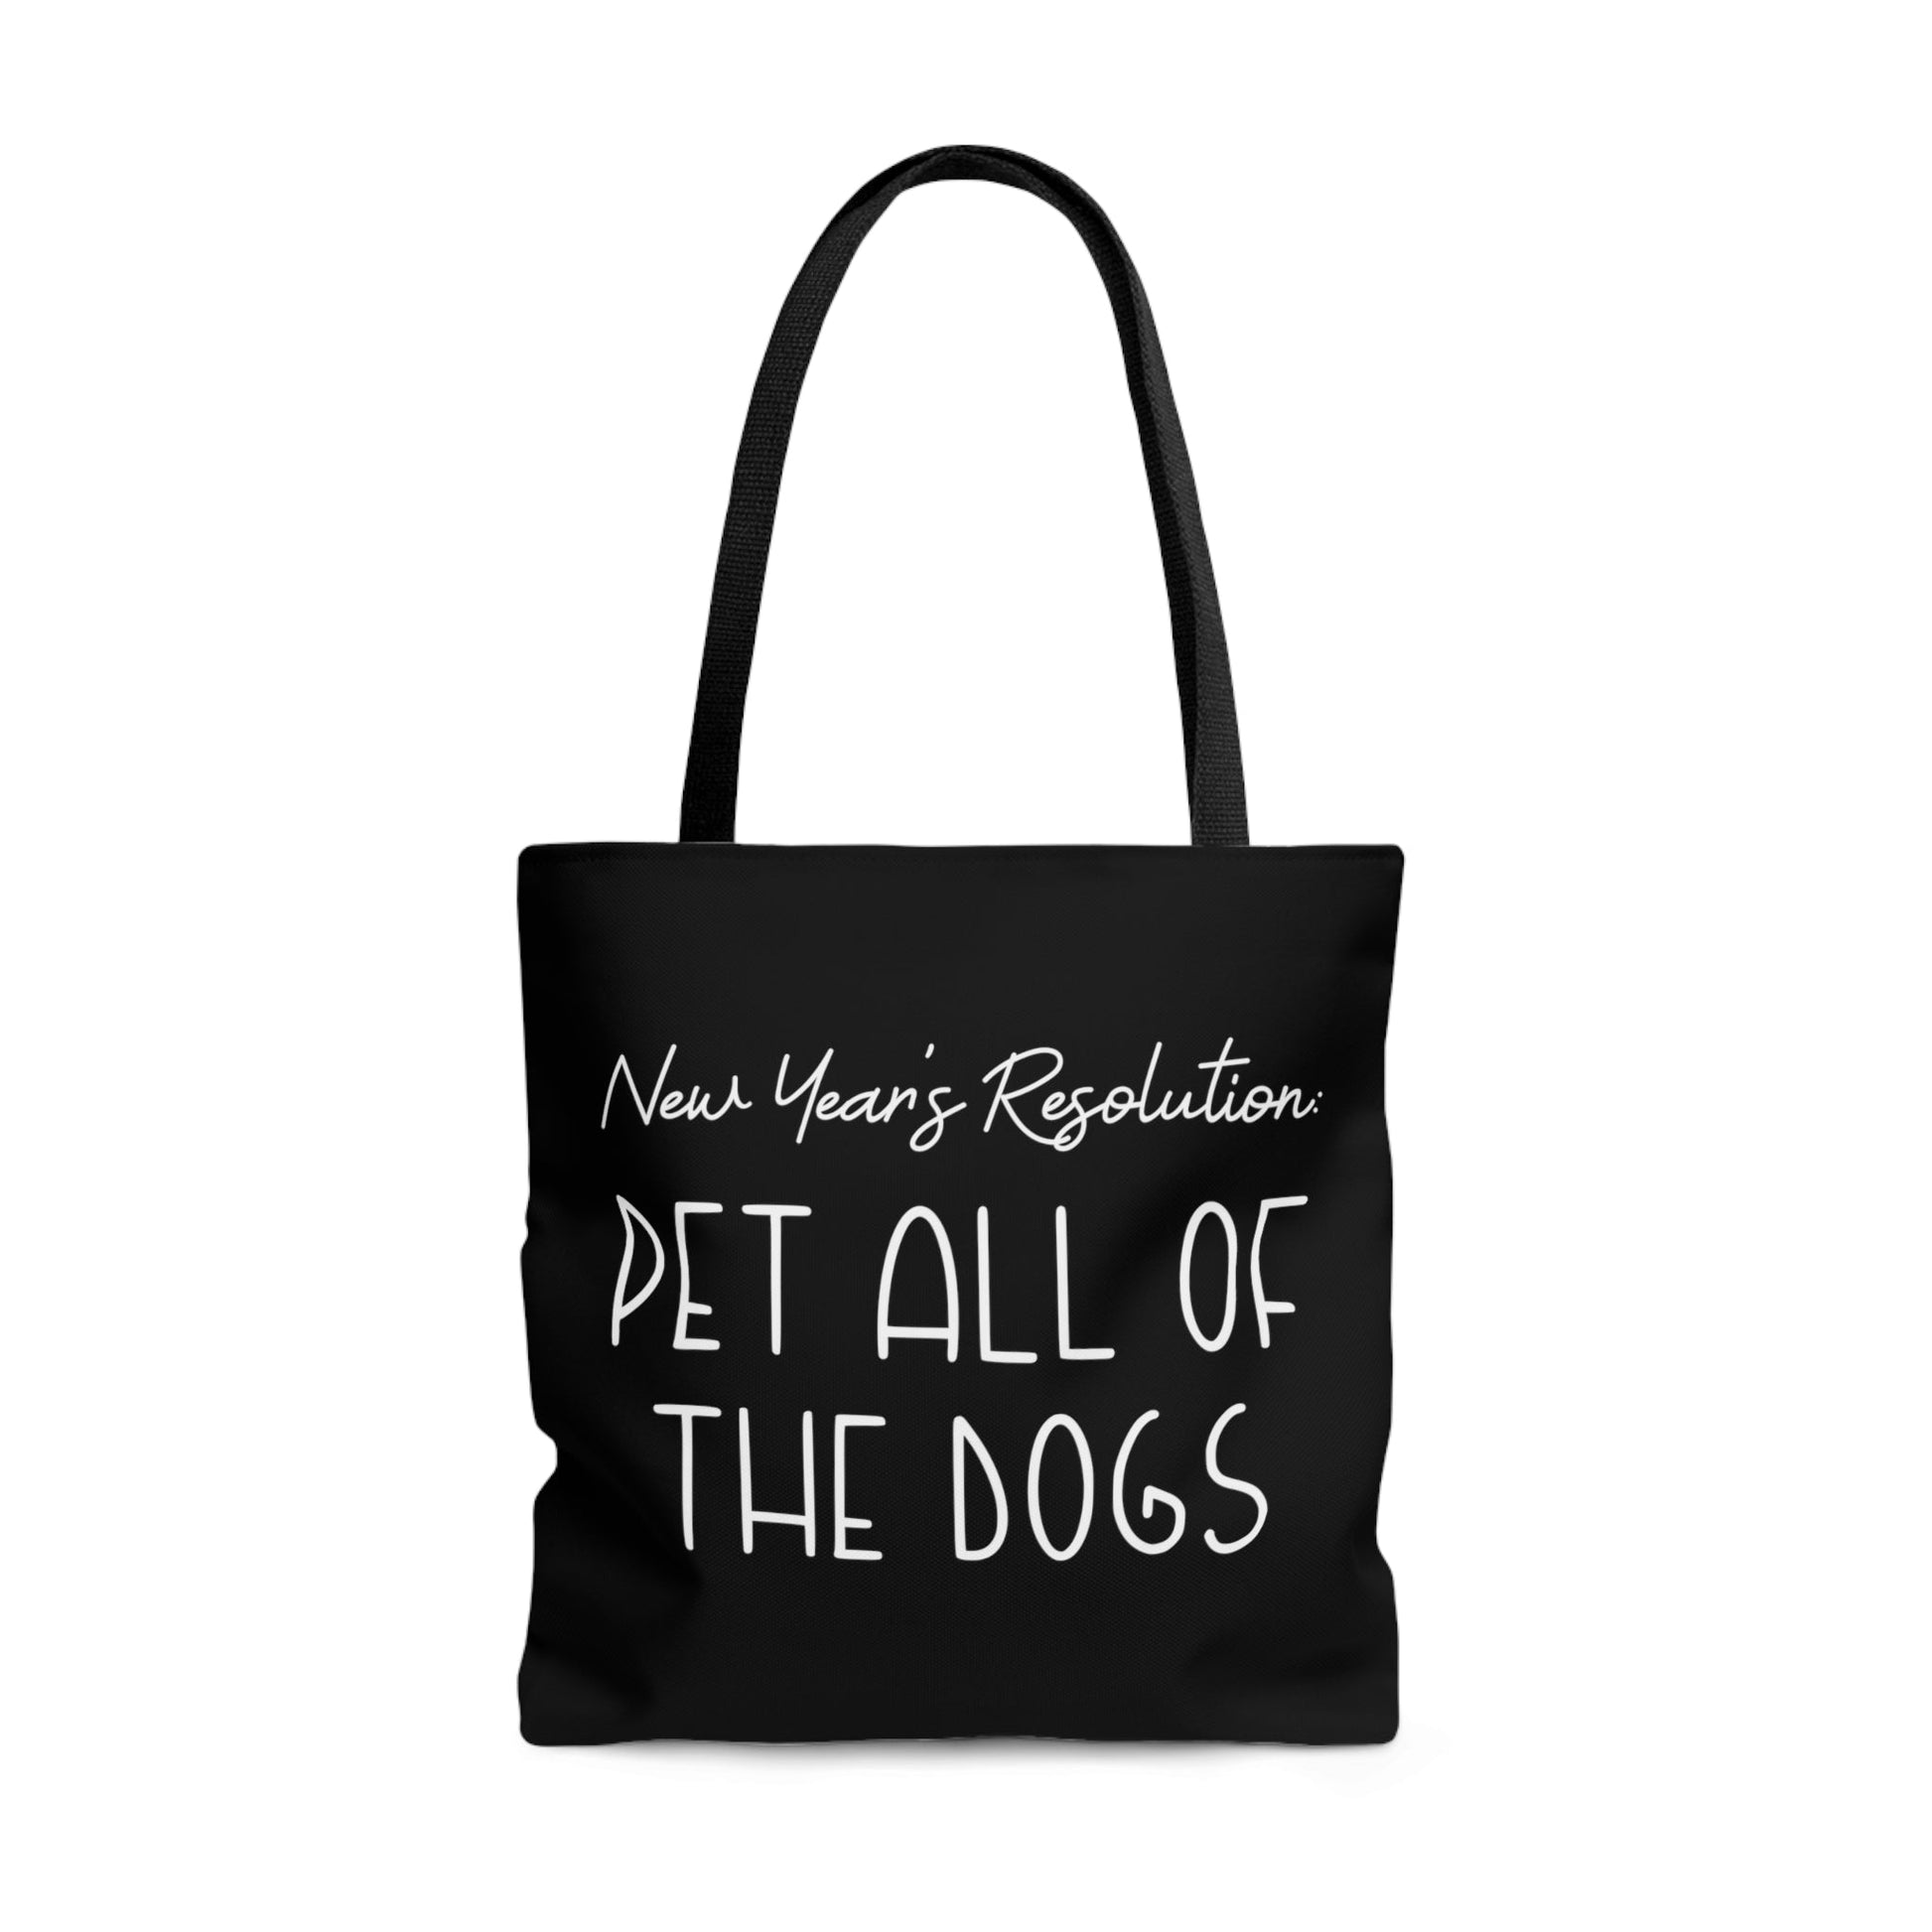 New Year's Resolution: Pet All Of The Dogs | Tote Bag - Detezi Designs-60666591008205335787